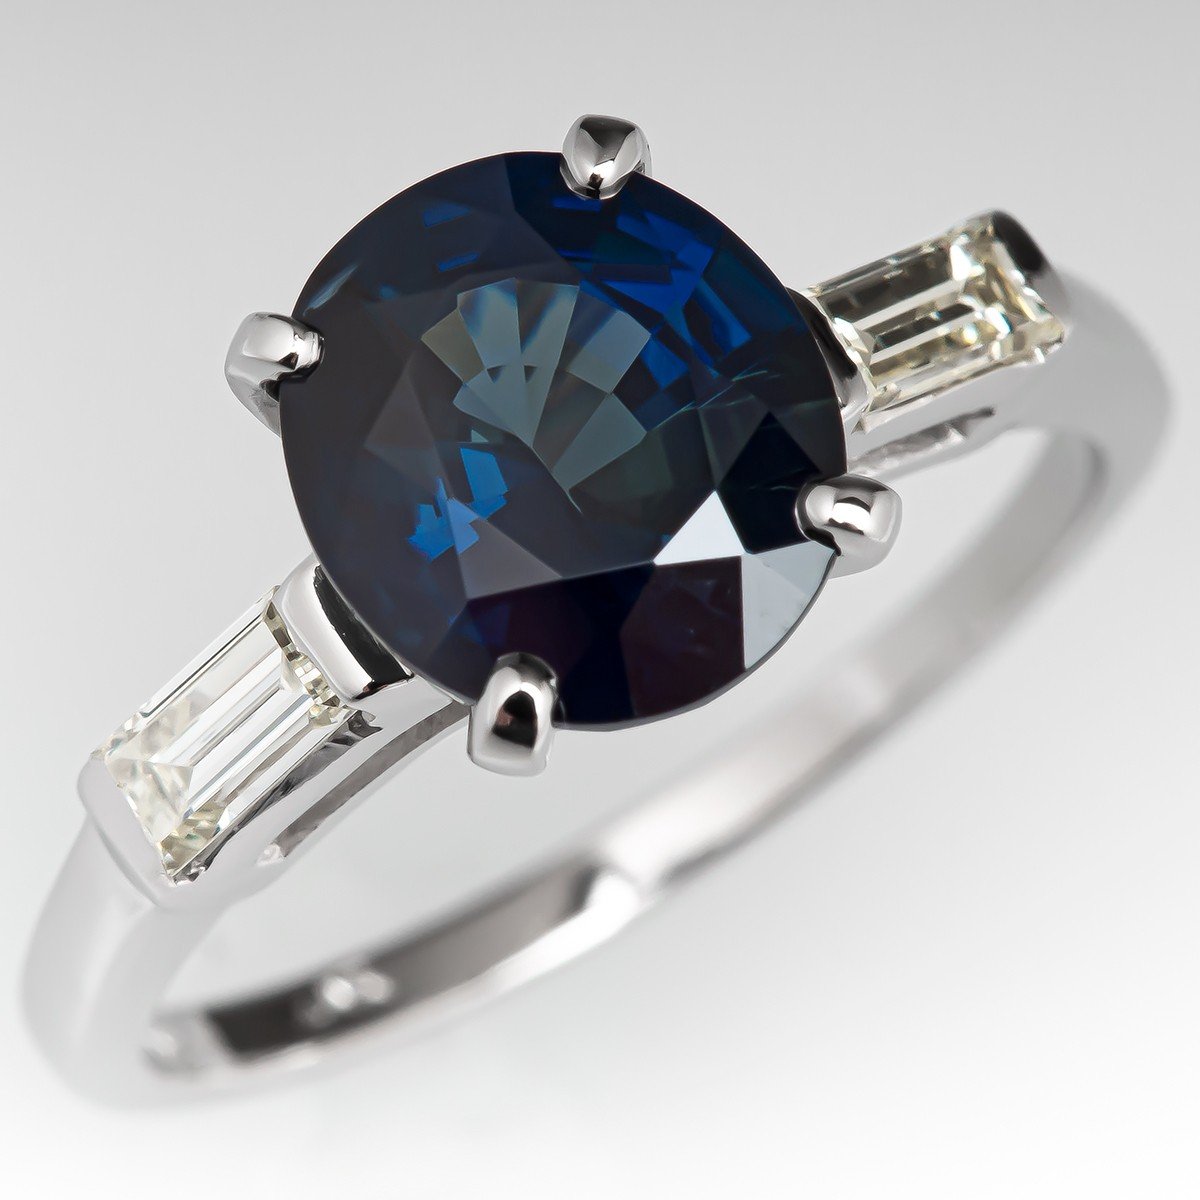 2.8 Carat Vintage Oval Cut Sapphire Engagement Ring in Platinum